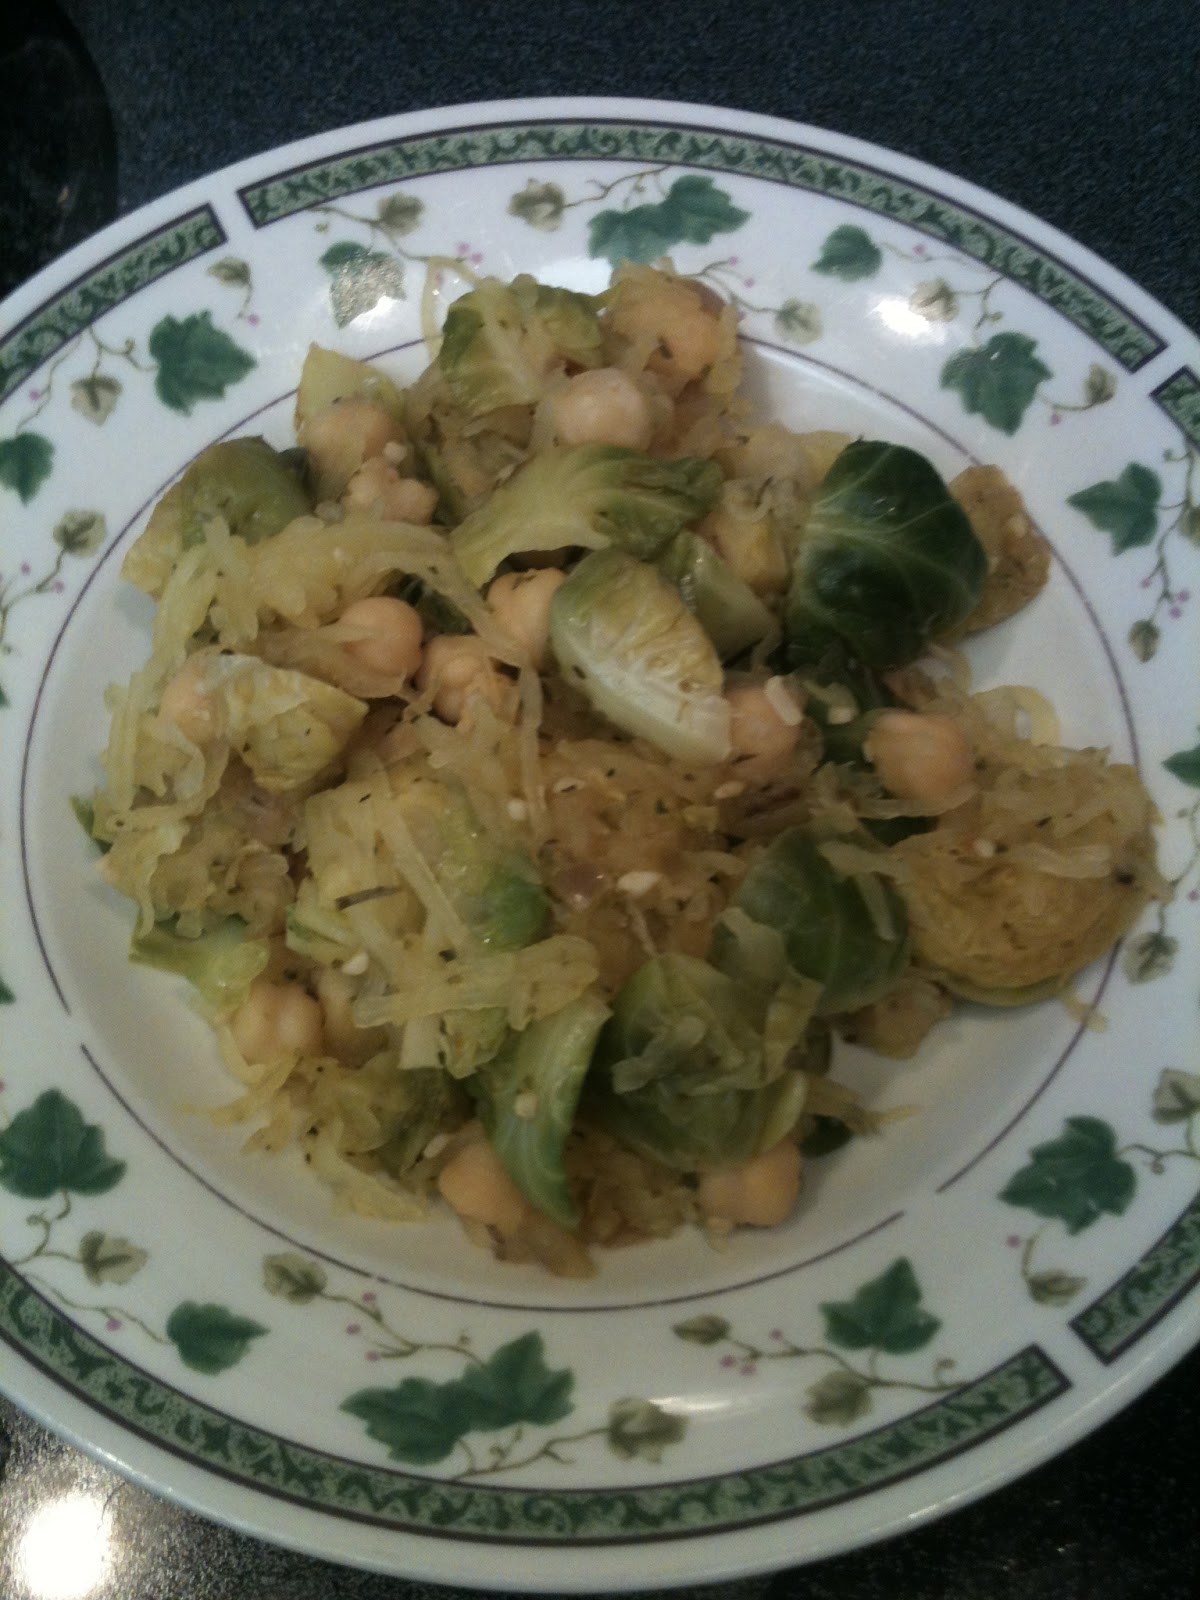 The Gluten Free Vegan: Spaghetti Squash with Roasted Brussel Sprouts ...